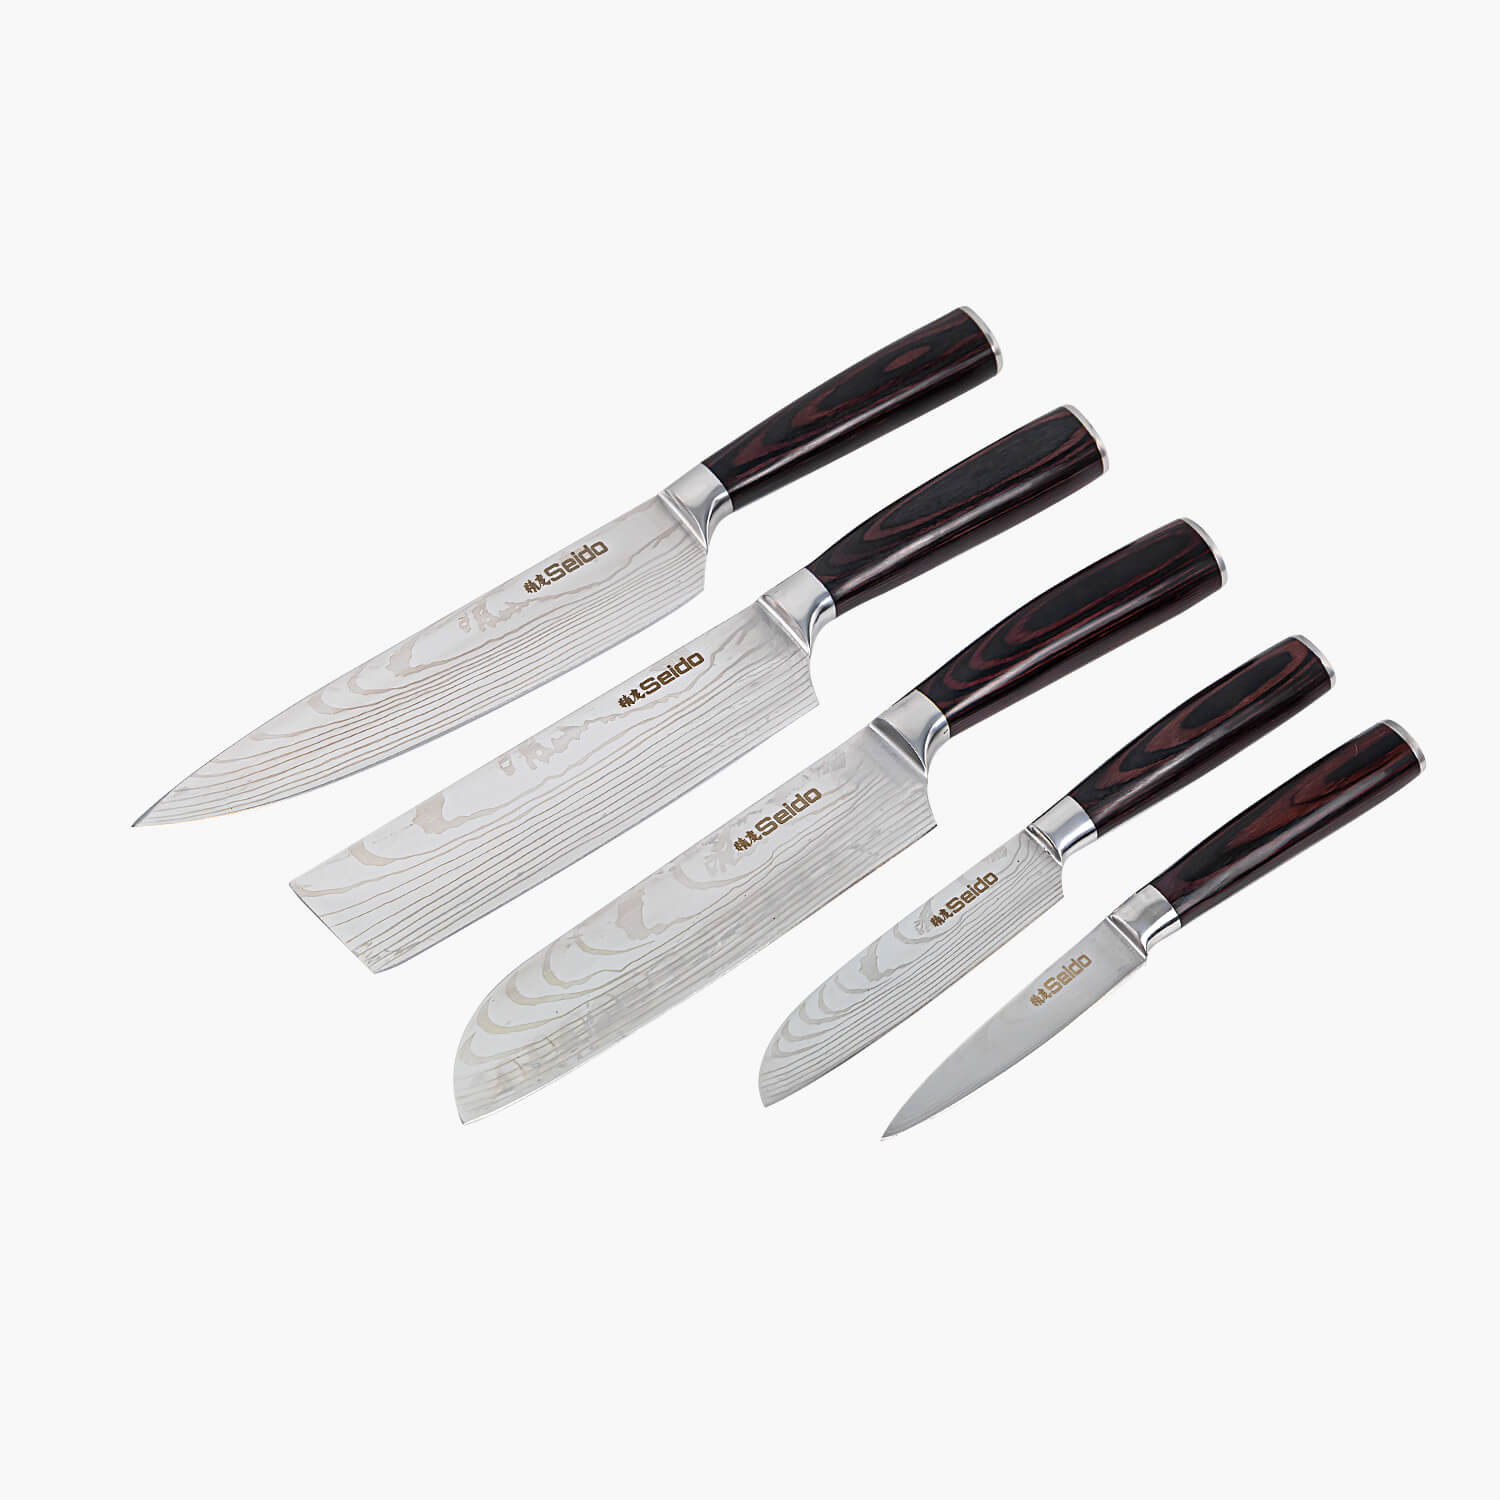 The Japanese Chef Knife Set By Seido Knives